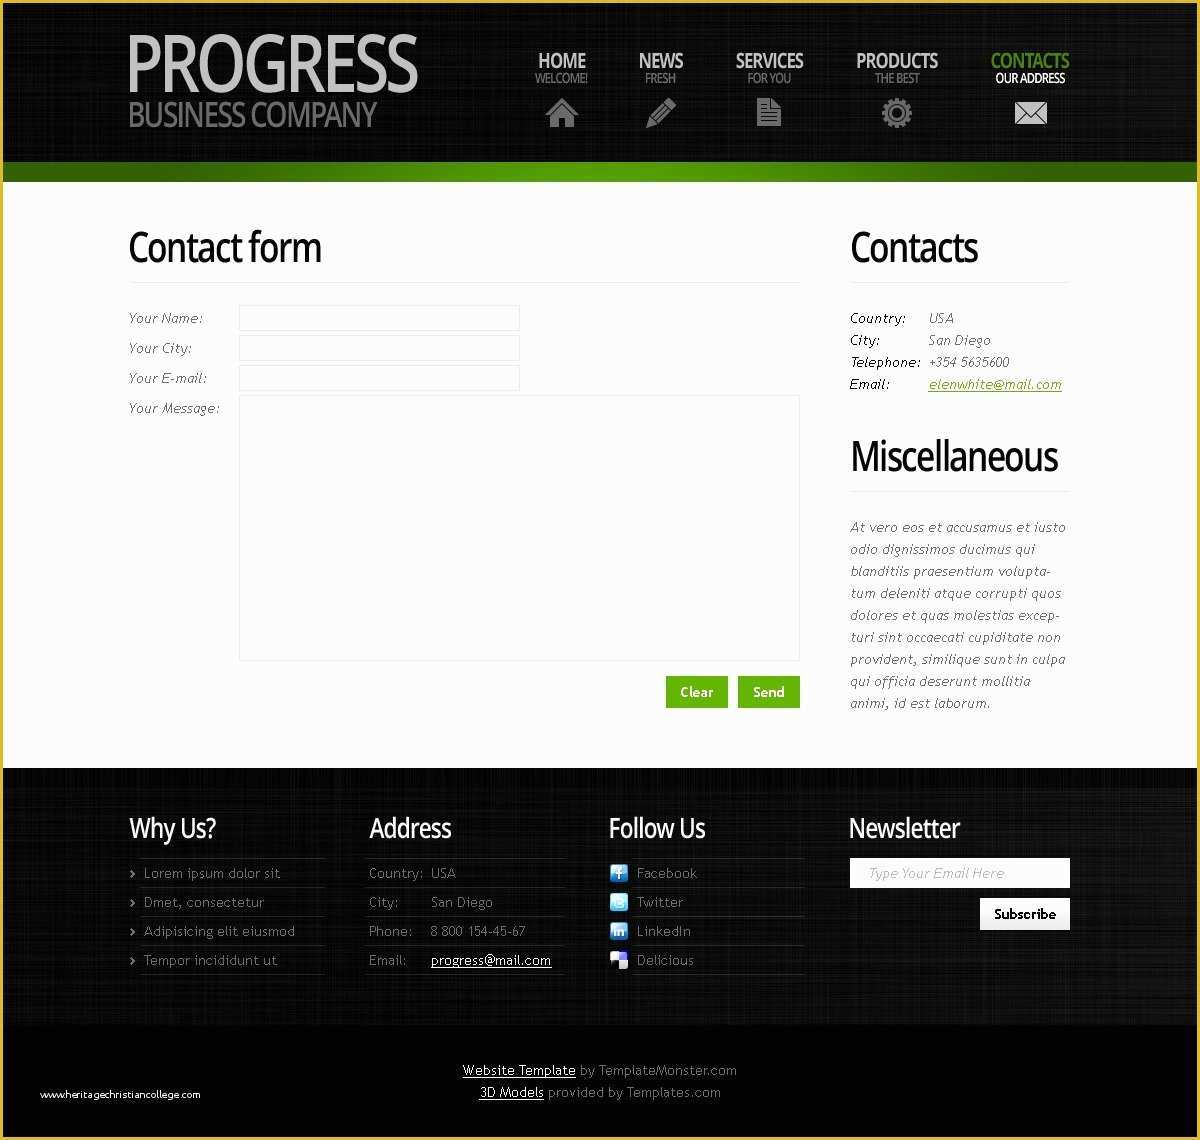 Free Commercial Website Templates Of Free Business Website Template with Header Slider